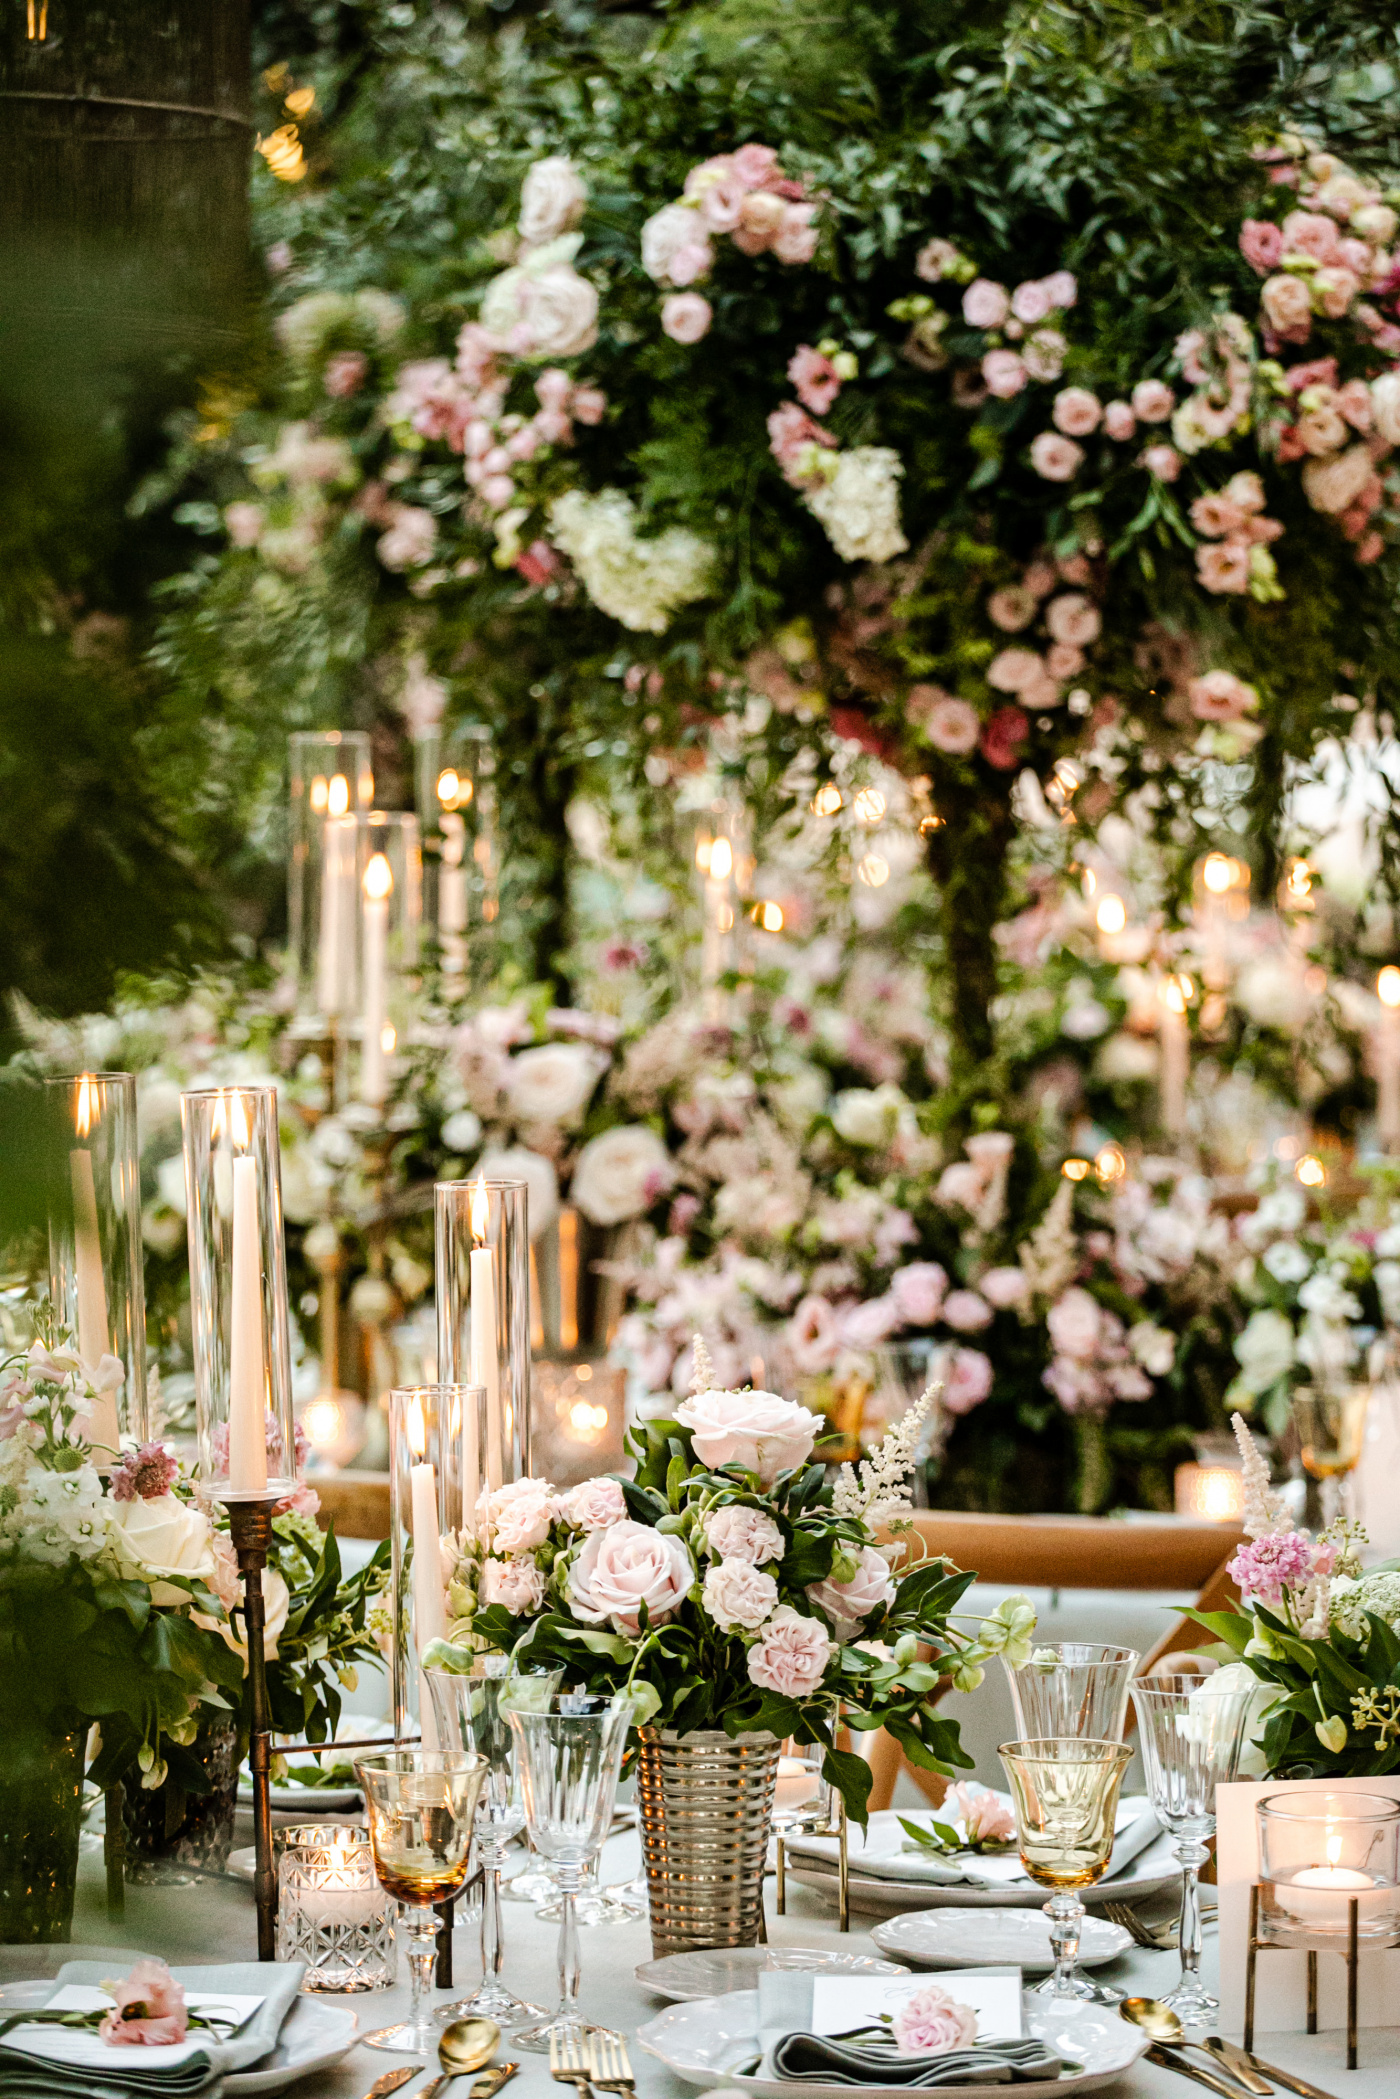 Tables flower decors with pale pink, ivory and greenery